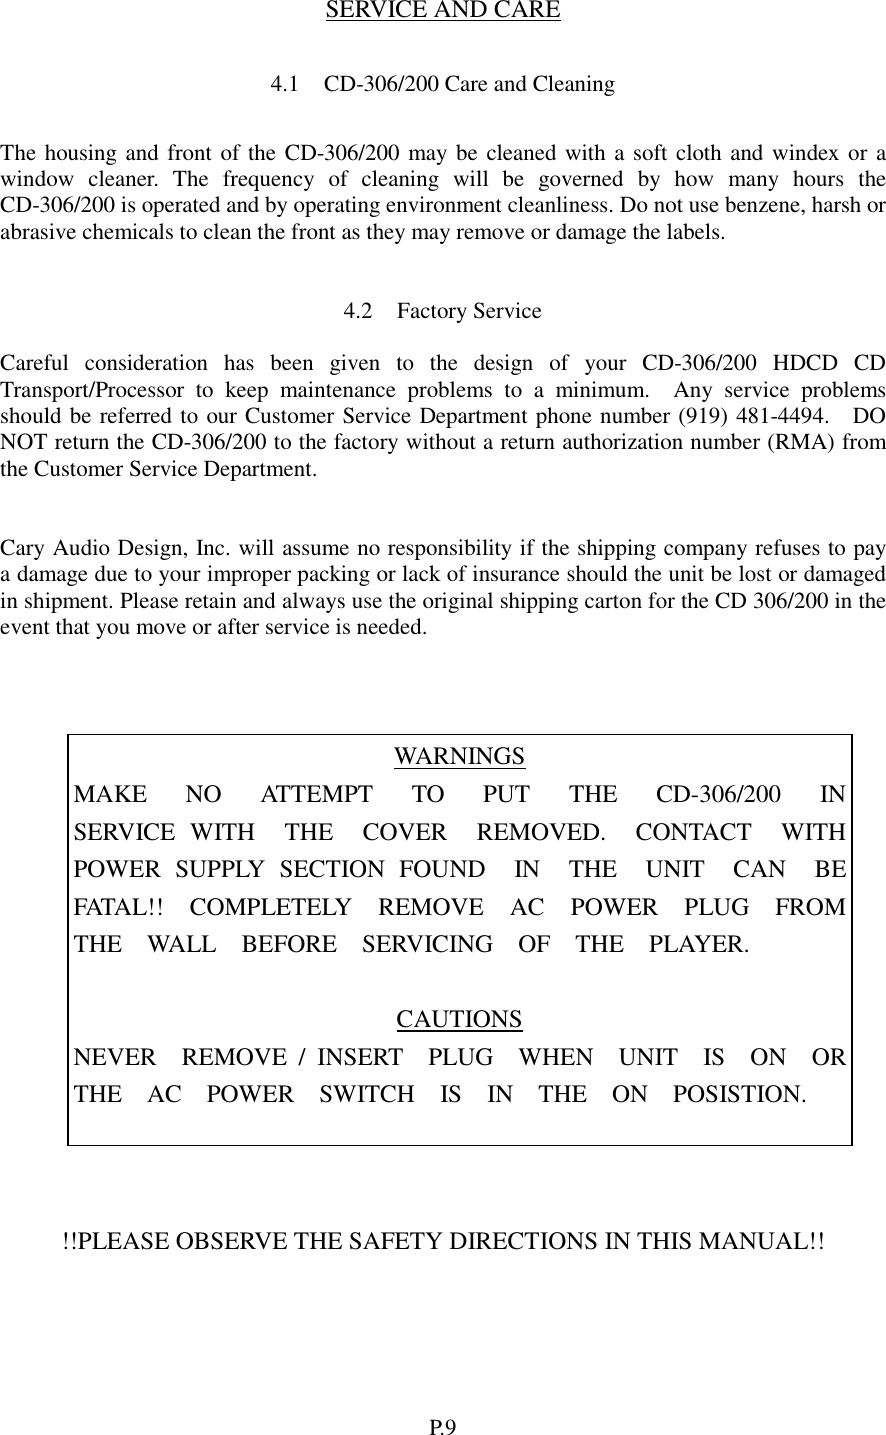 Page 10 of 12 - Cary-Audio-Design Cary-Audio-Design-Cd-200-Users-Manual- CD 306/200 Operating Manual  Cary-audio-design-cd-200-users-manual